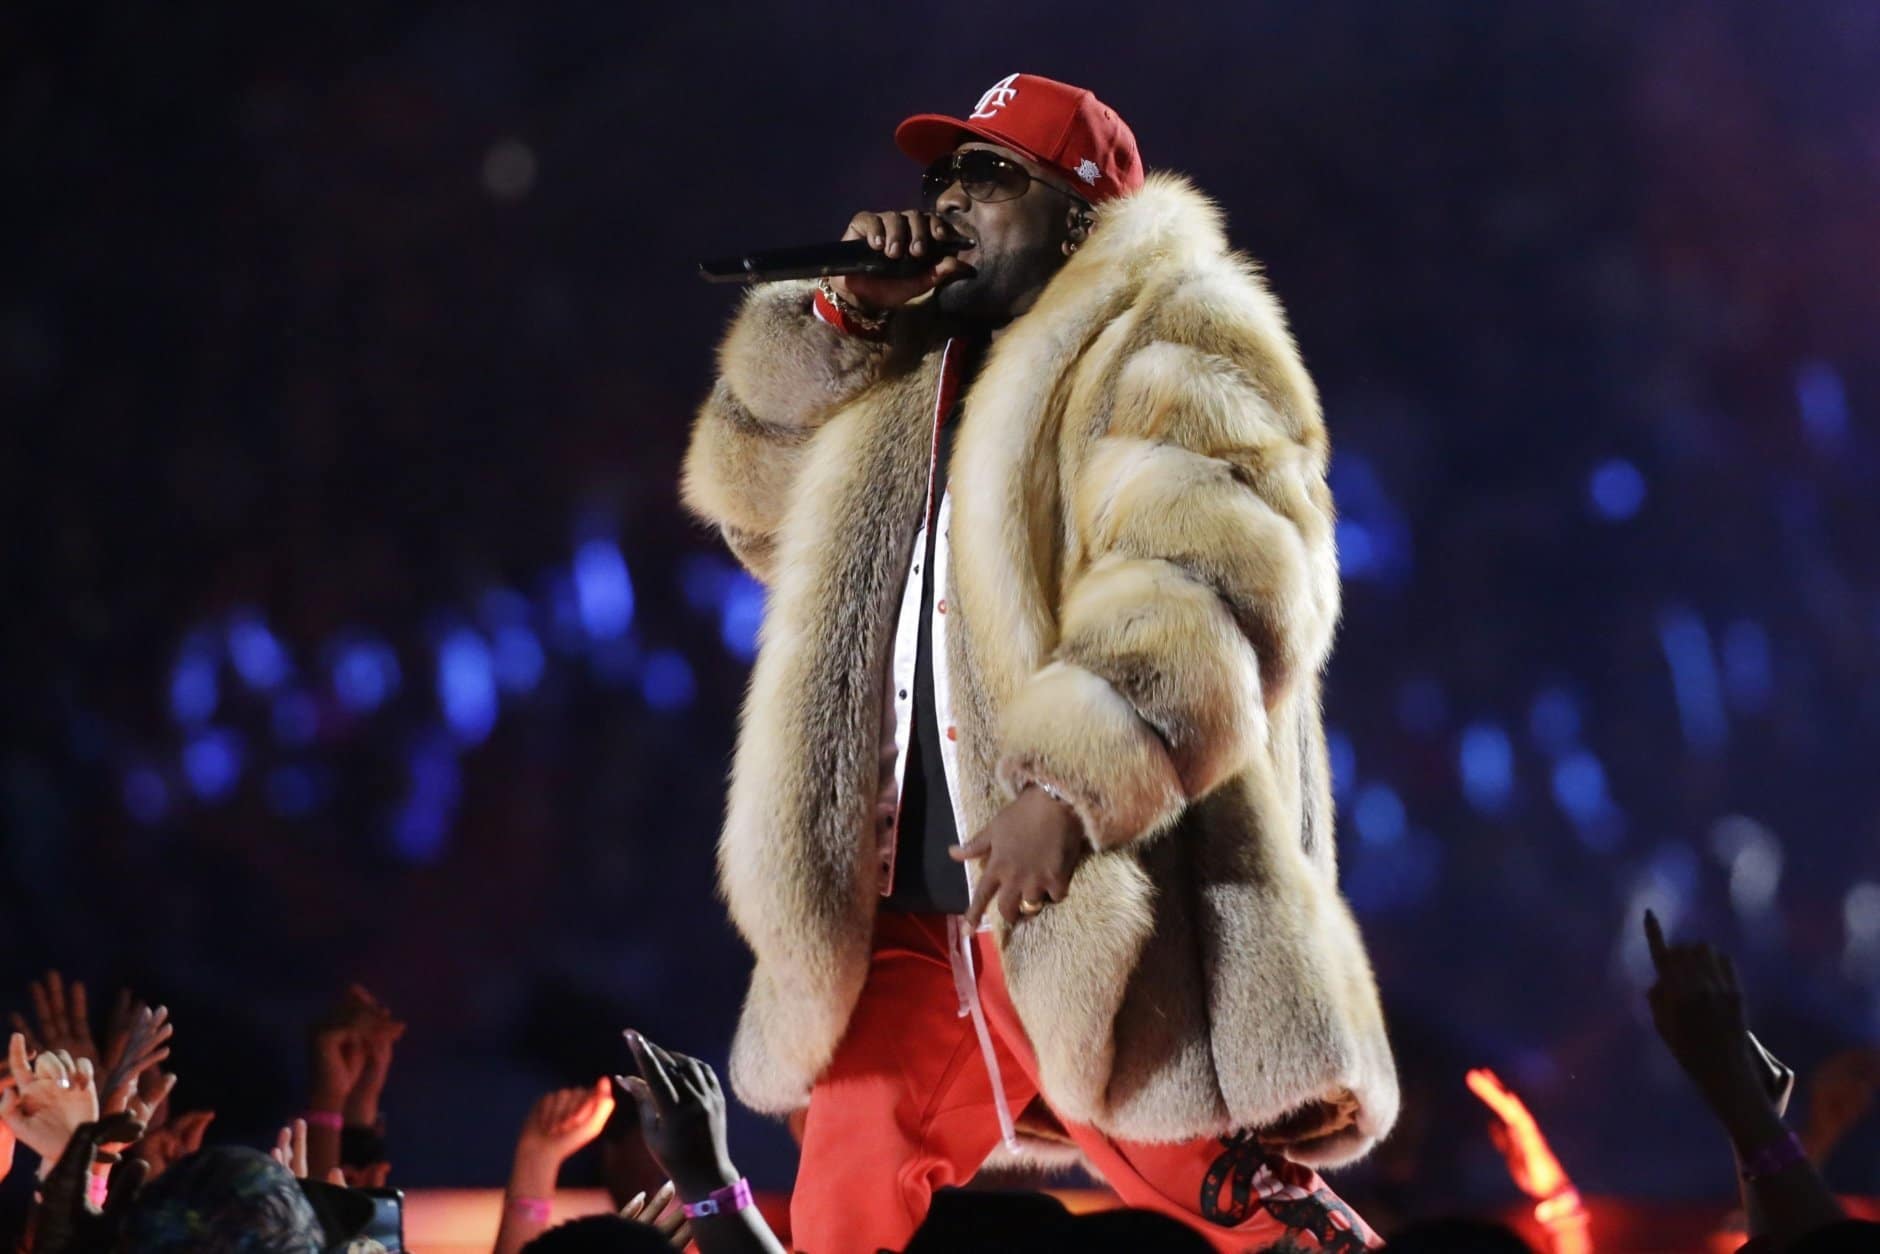 Big Boi performs during halftime of the NFL Super Bowl 53 football game between the Los Angeles Rams and the New England Patriots Sunday, Feb. 3, 2019, in Atlanta. (AP Photo/Mark Humphrey)